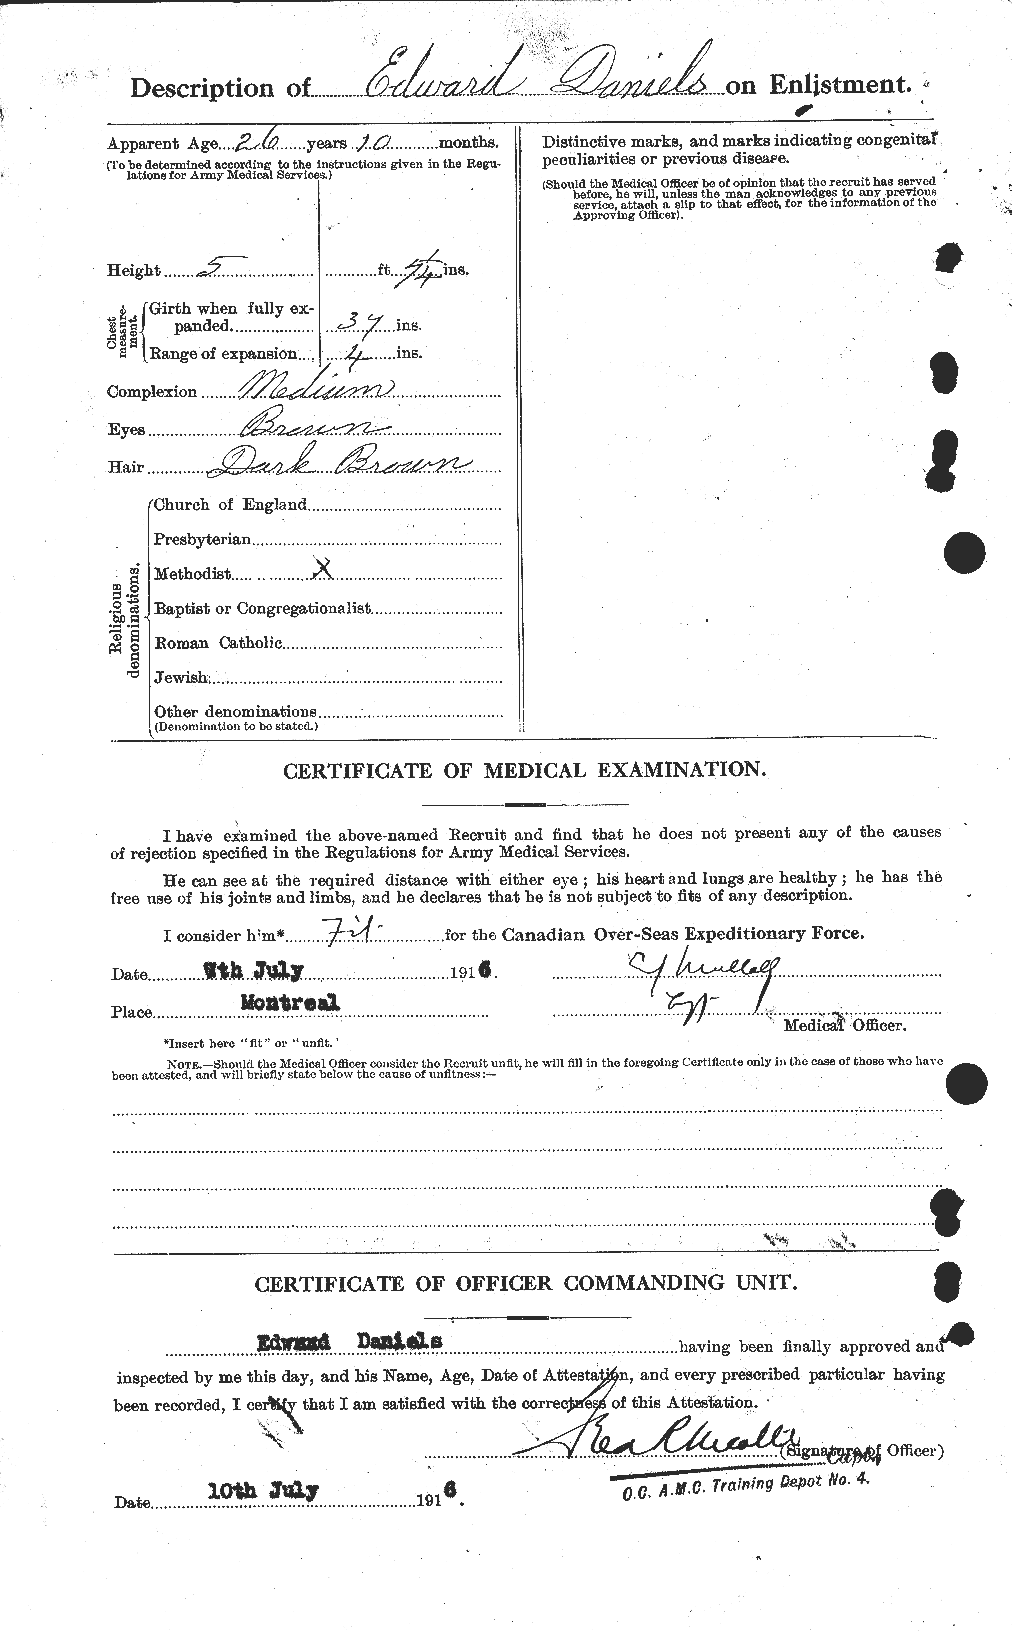 Personnel Records of the First World War - CEF 279582b